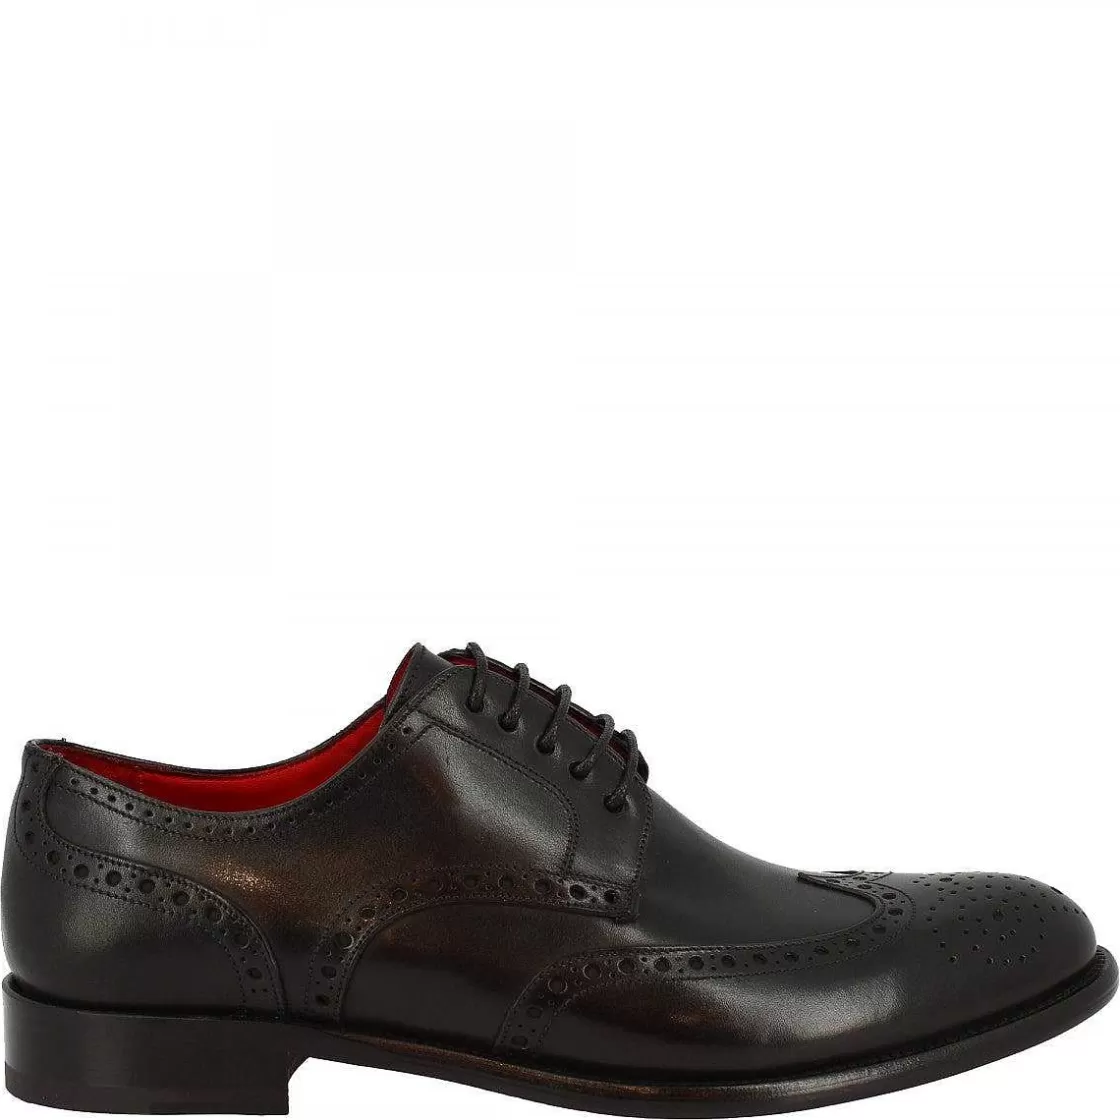 Leonardo Men'S Handmade Lace-Up Derby Brogues Shoes With Rounded Toe In Black Calf Leather Online